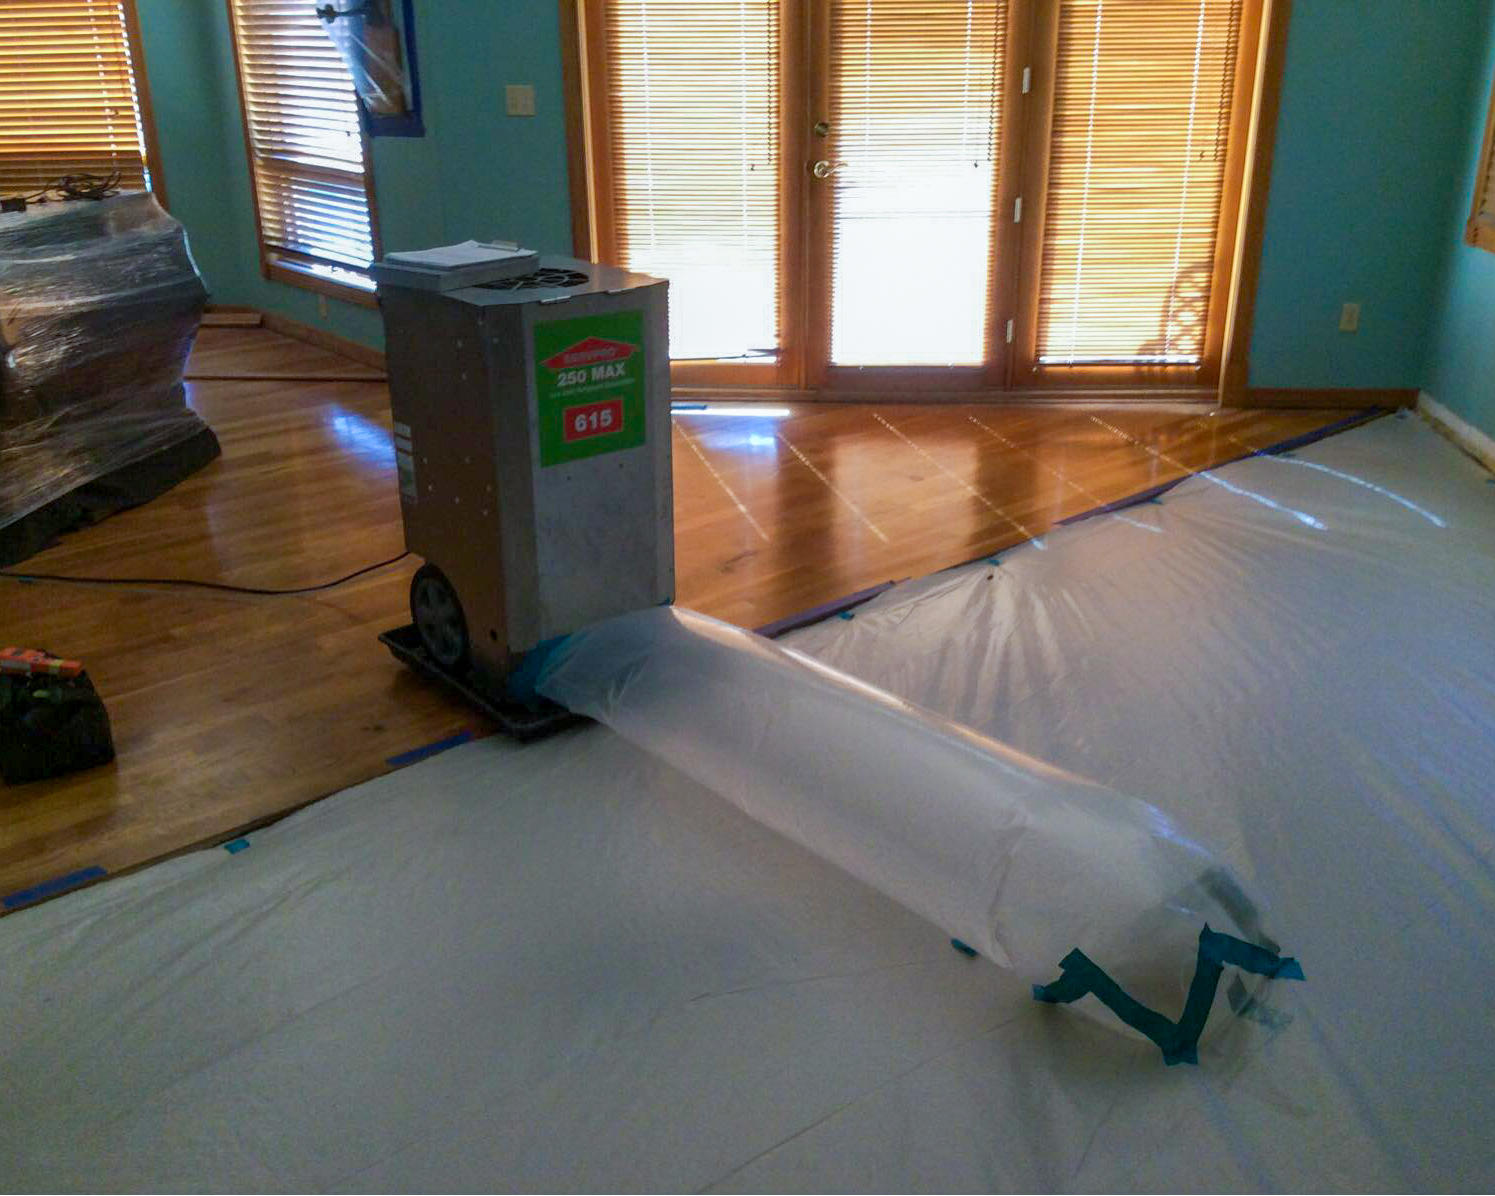 Do you need water damage restoration service? SERVPRO of Yavapai County has the latest equipment and the right people to get the job done efficiently and effectively! Give us a call!